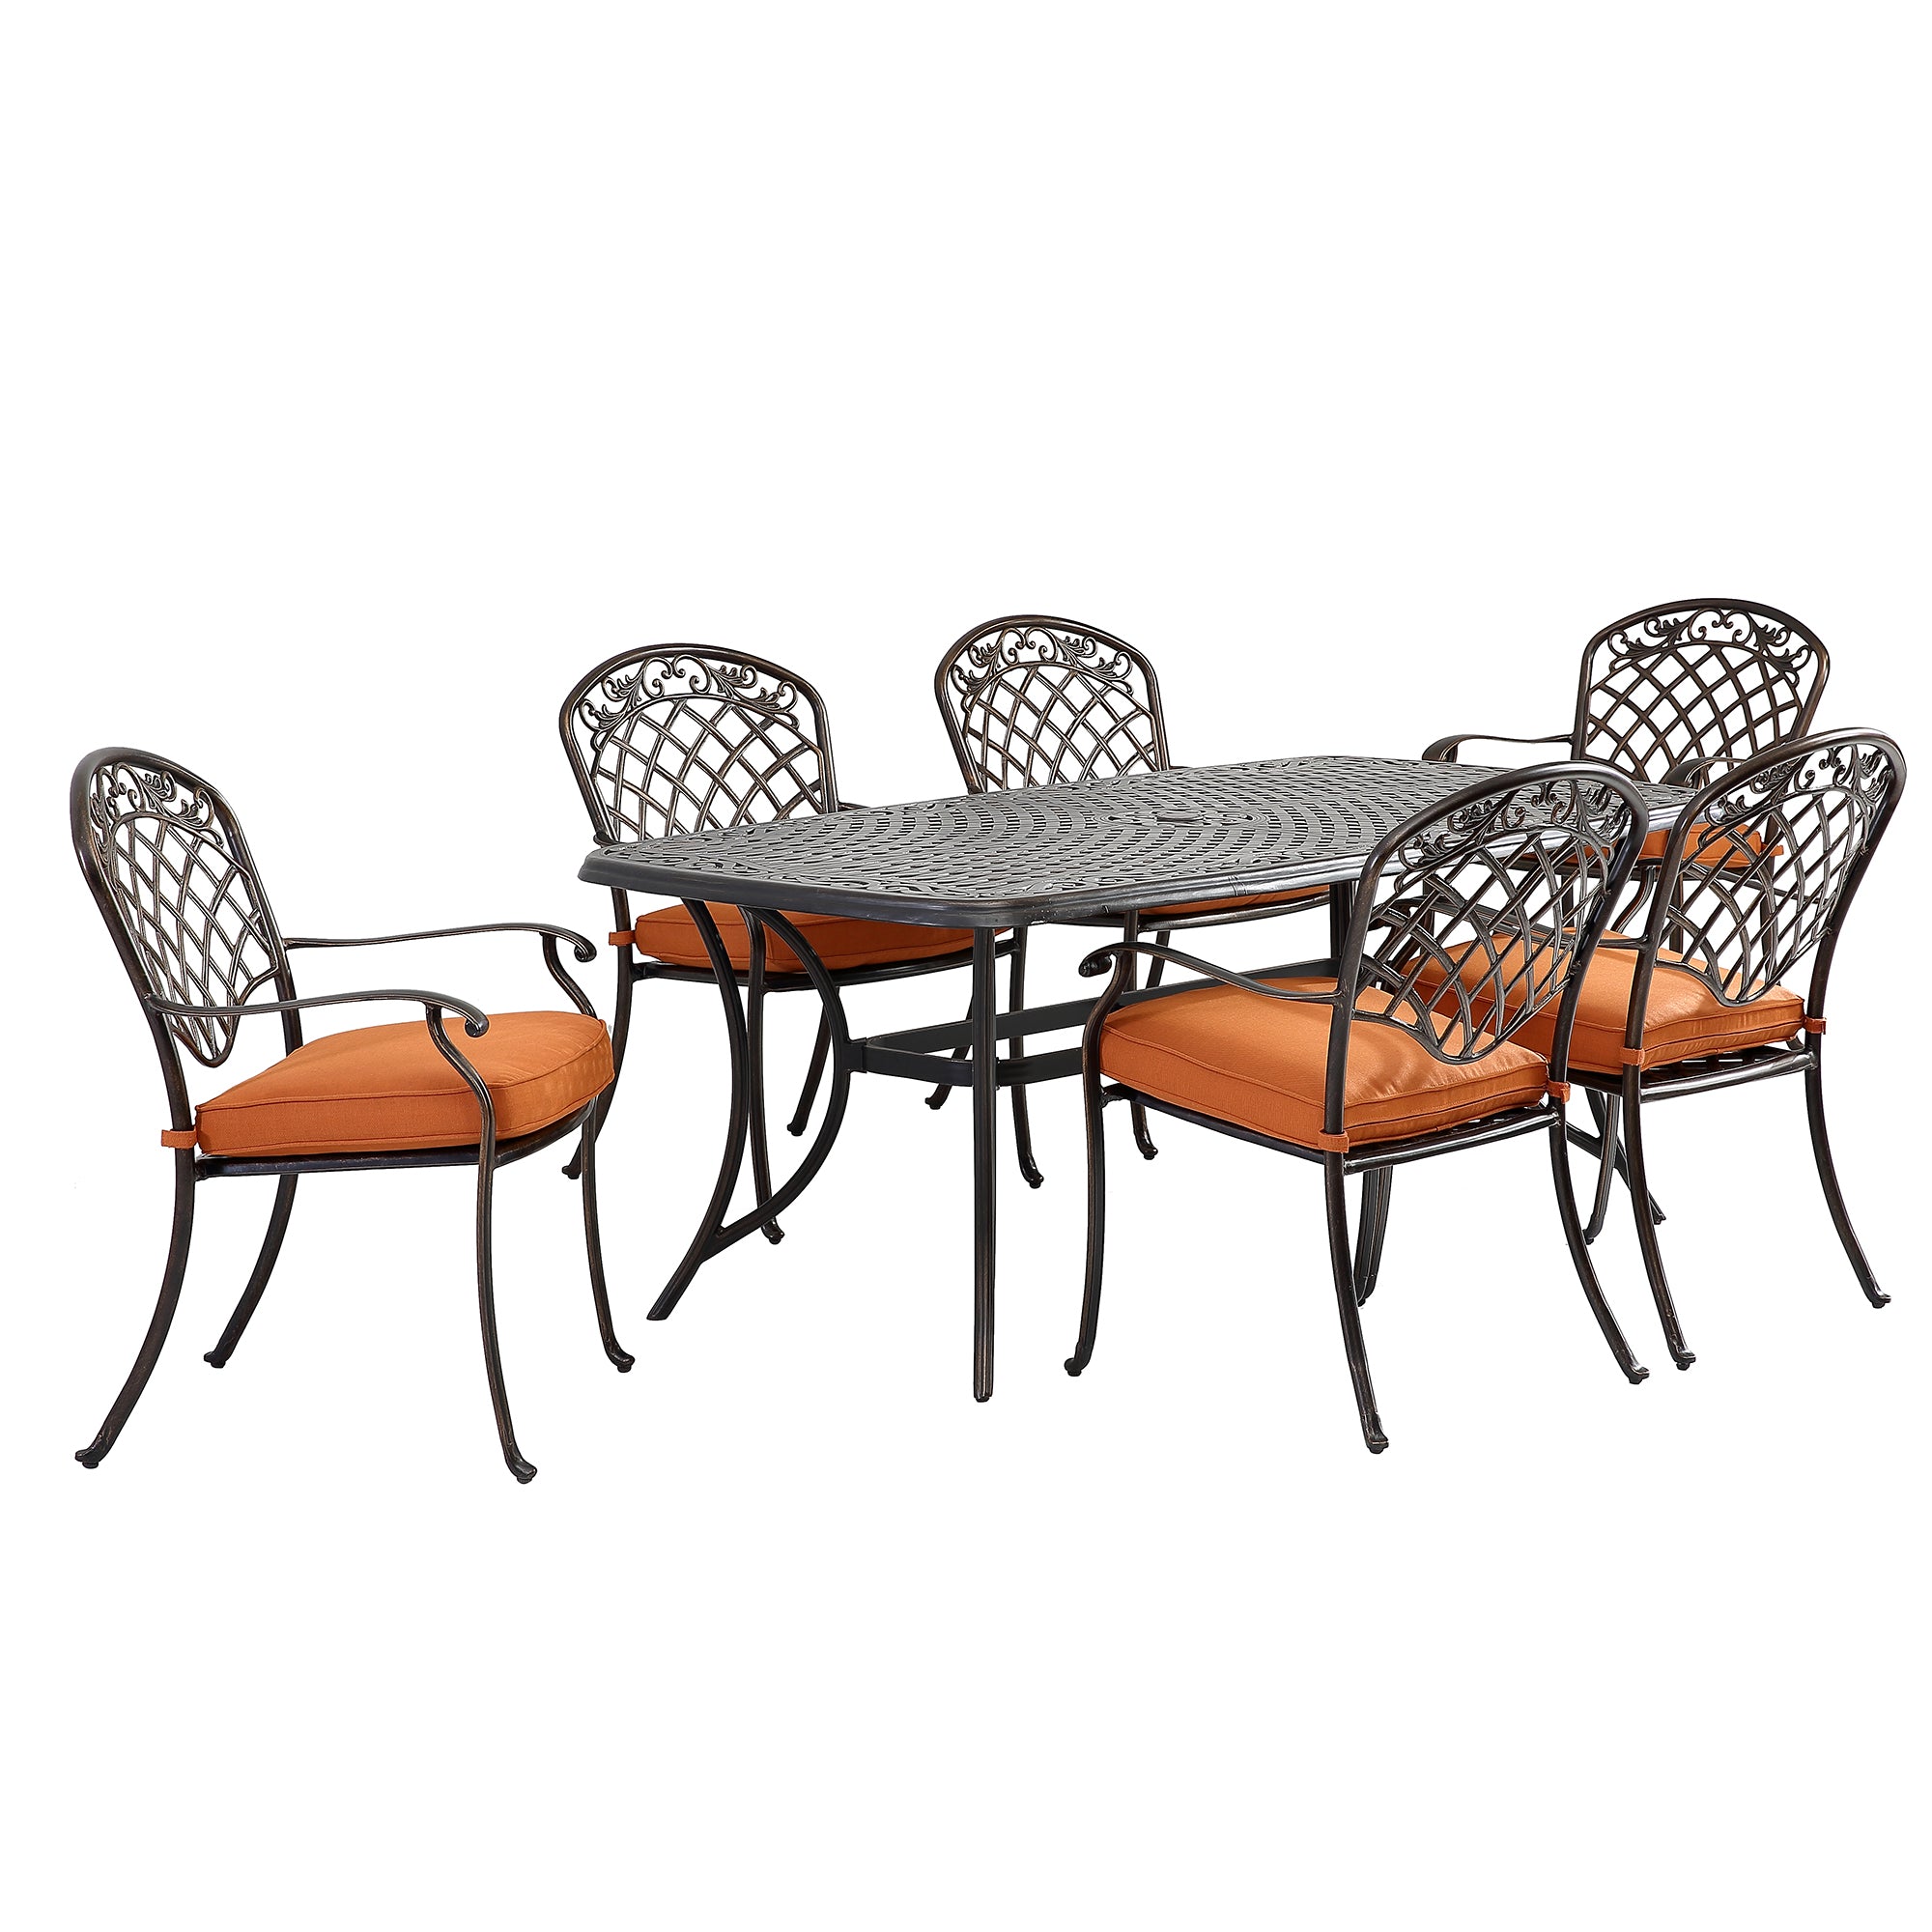 7-piece cast aluminum dining table set with rectangular rounded corner table and diagonal mesh backrest dining chairs